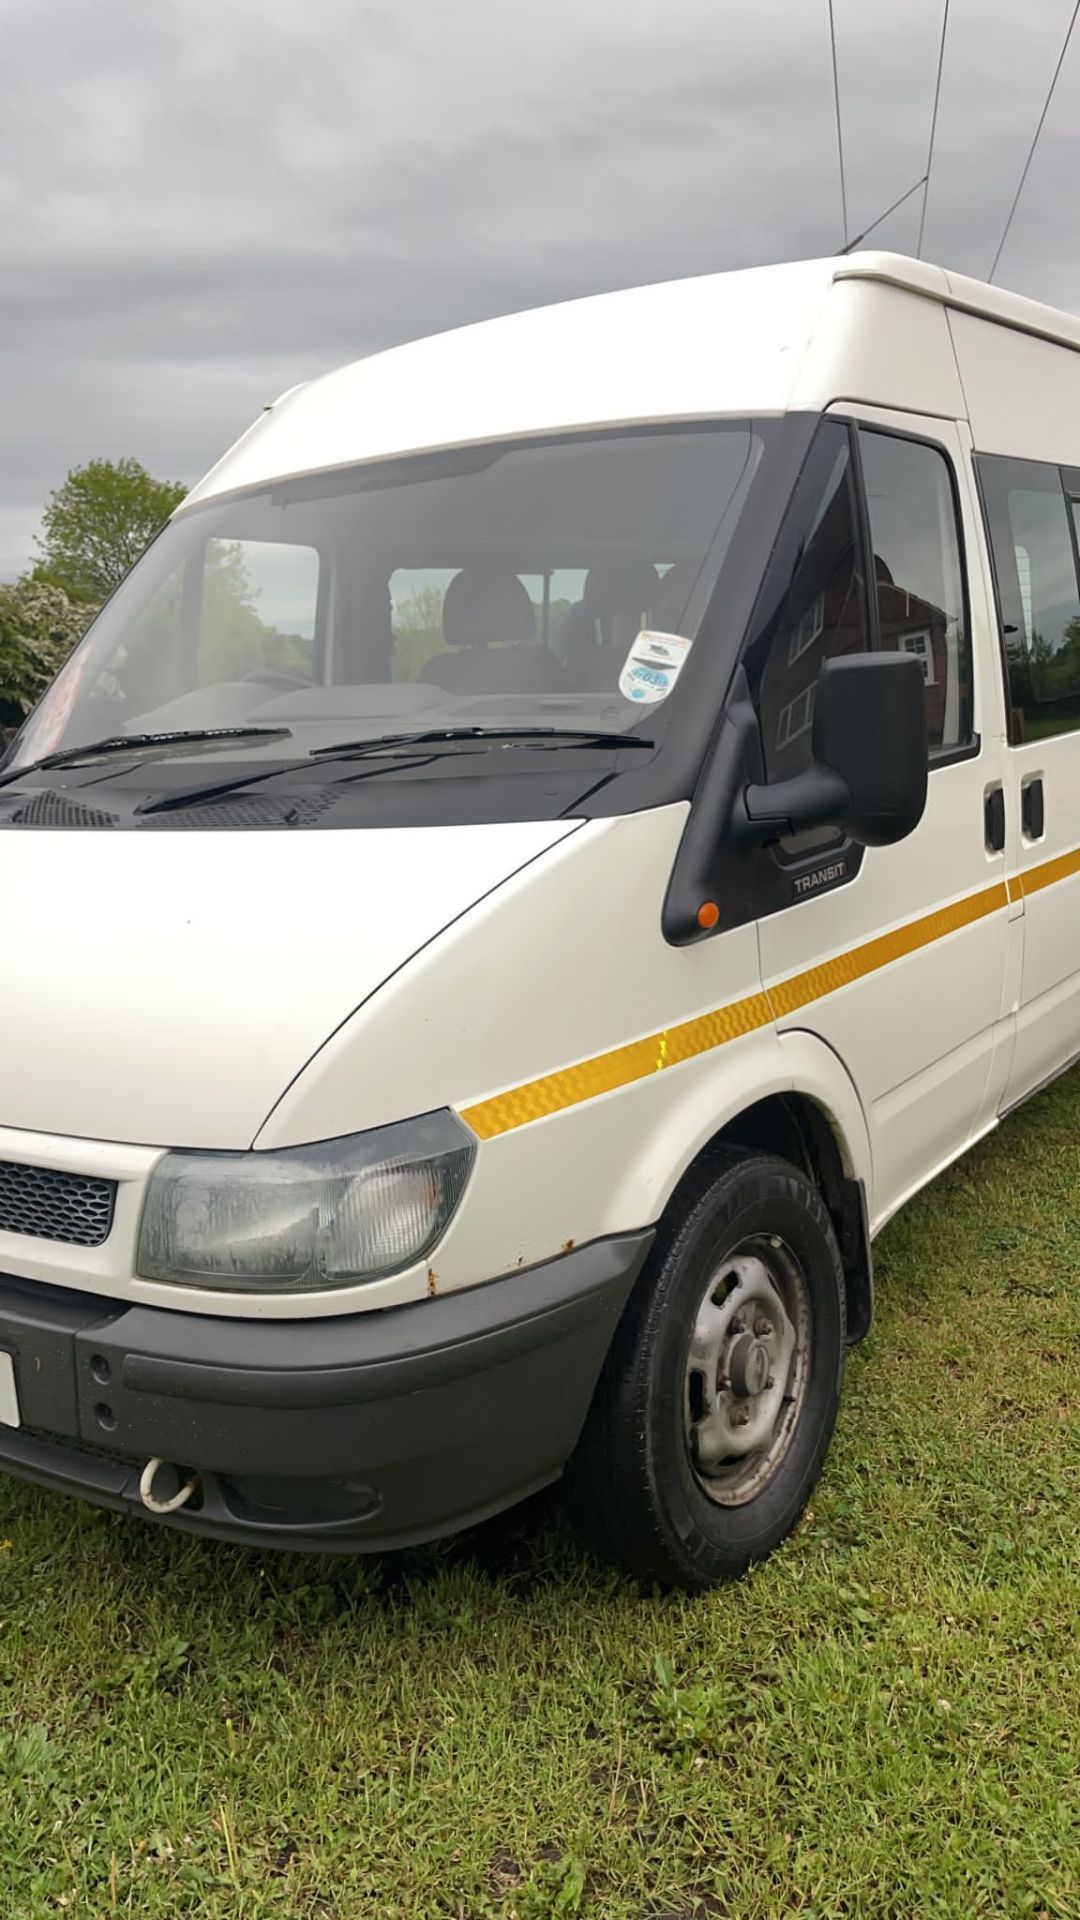 2004 04 FORD TRANSIT WHITE MINIBUS light scrape on drivers side, 9 seats, Wheel Chair lift fitted - Image 3 of 22